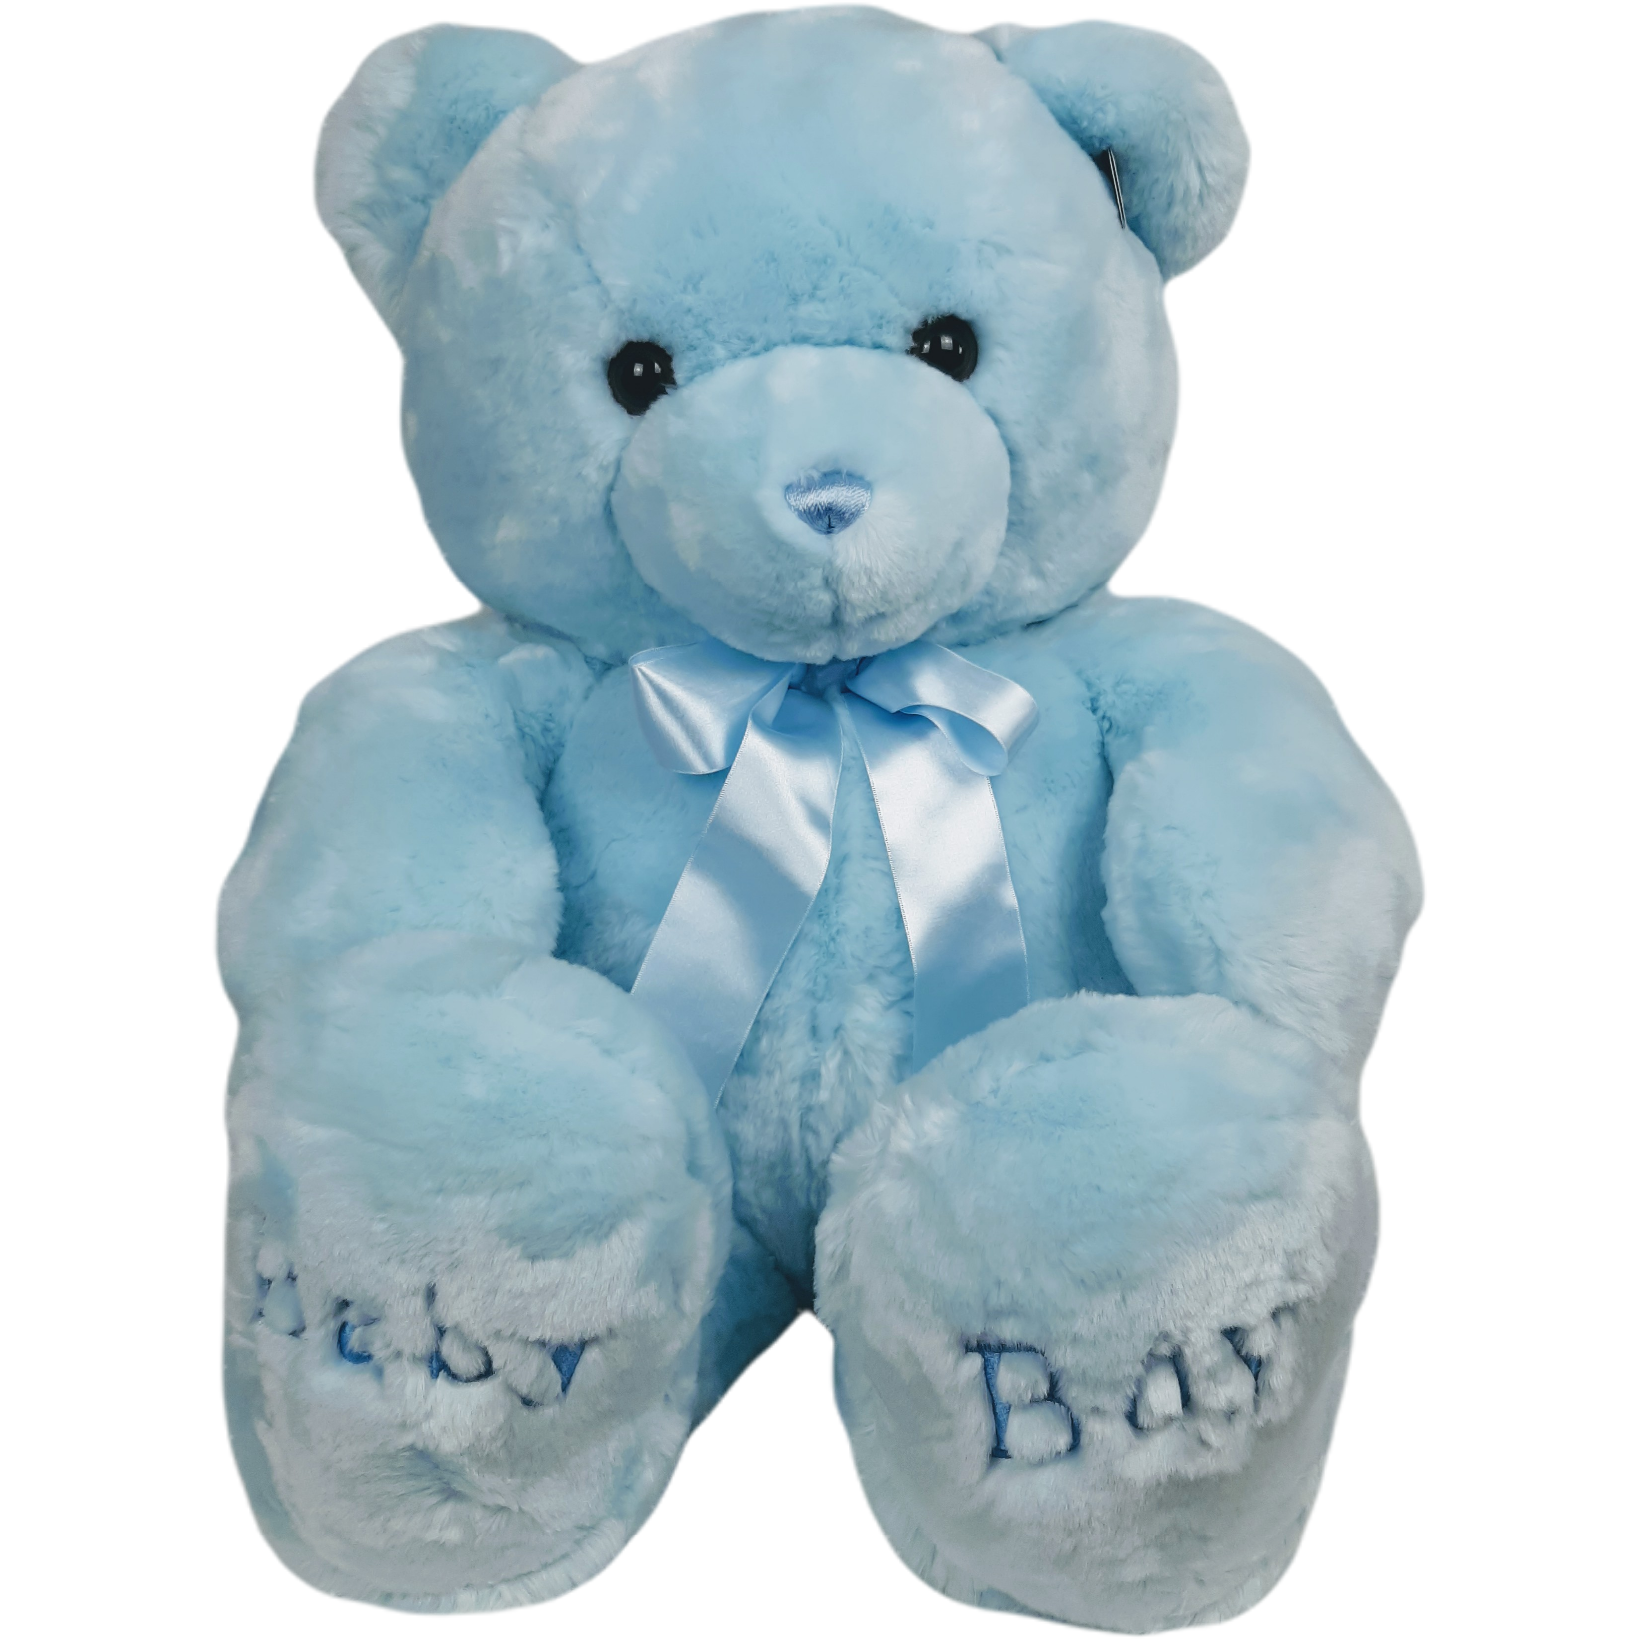 36 inch jumbo bear with ribbonned bow around neck and Baby Boy or Baby Girl embroidered on the feet.  Available in pink baby girl or blue baby boy.